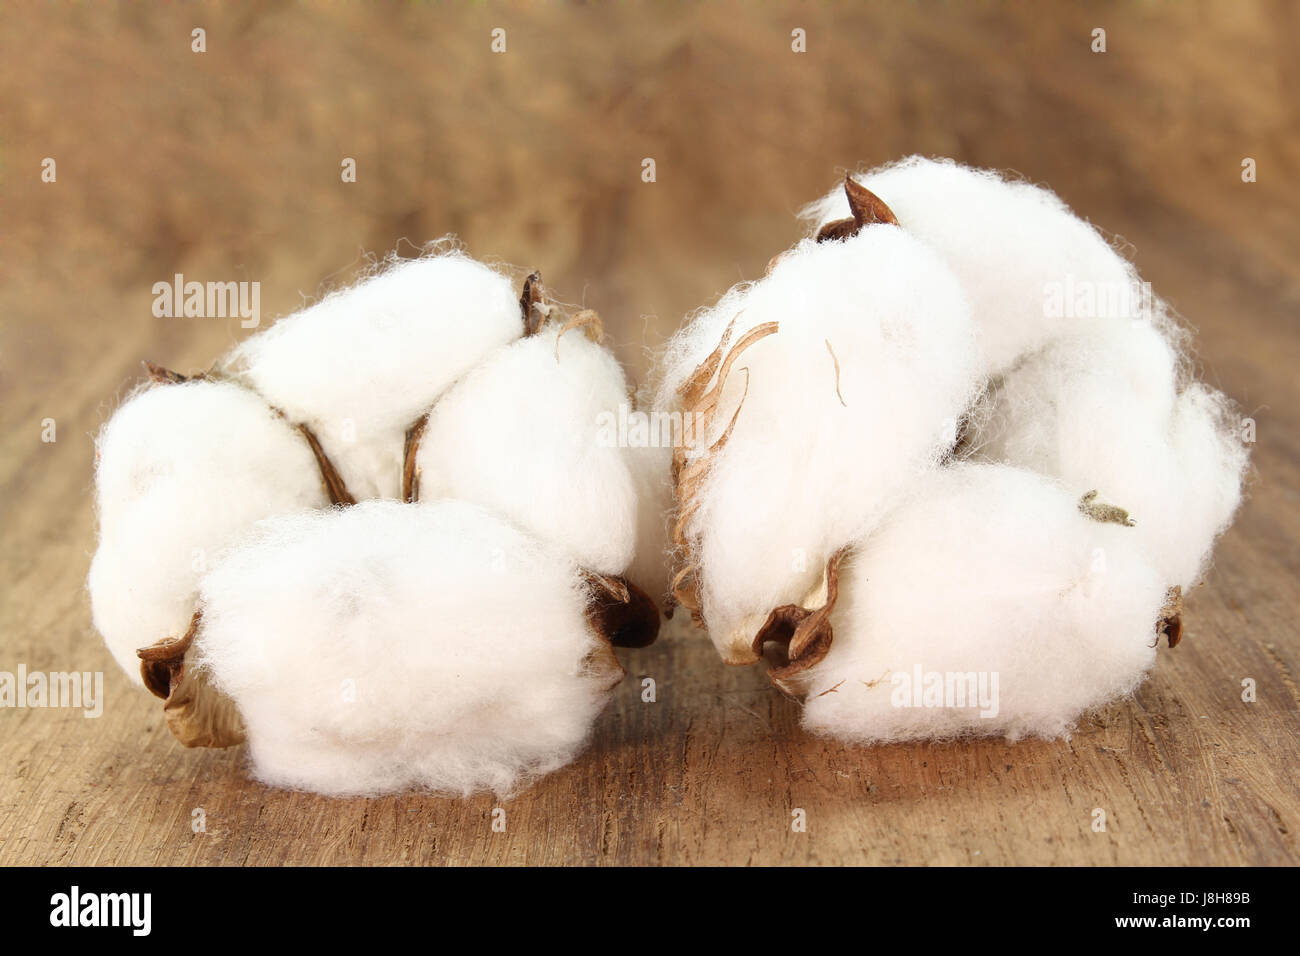 useful plant, soft, raw material, dried, cotton, backdrop, background, plant, Stock Photo